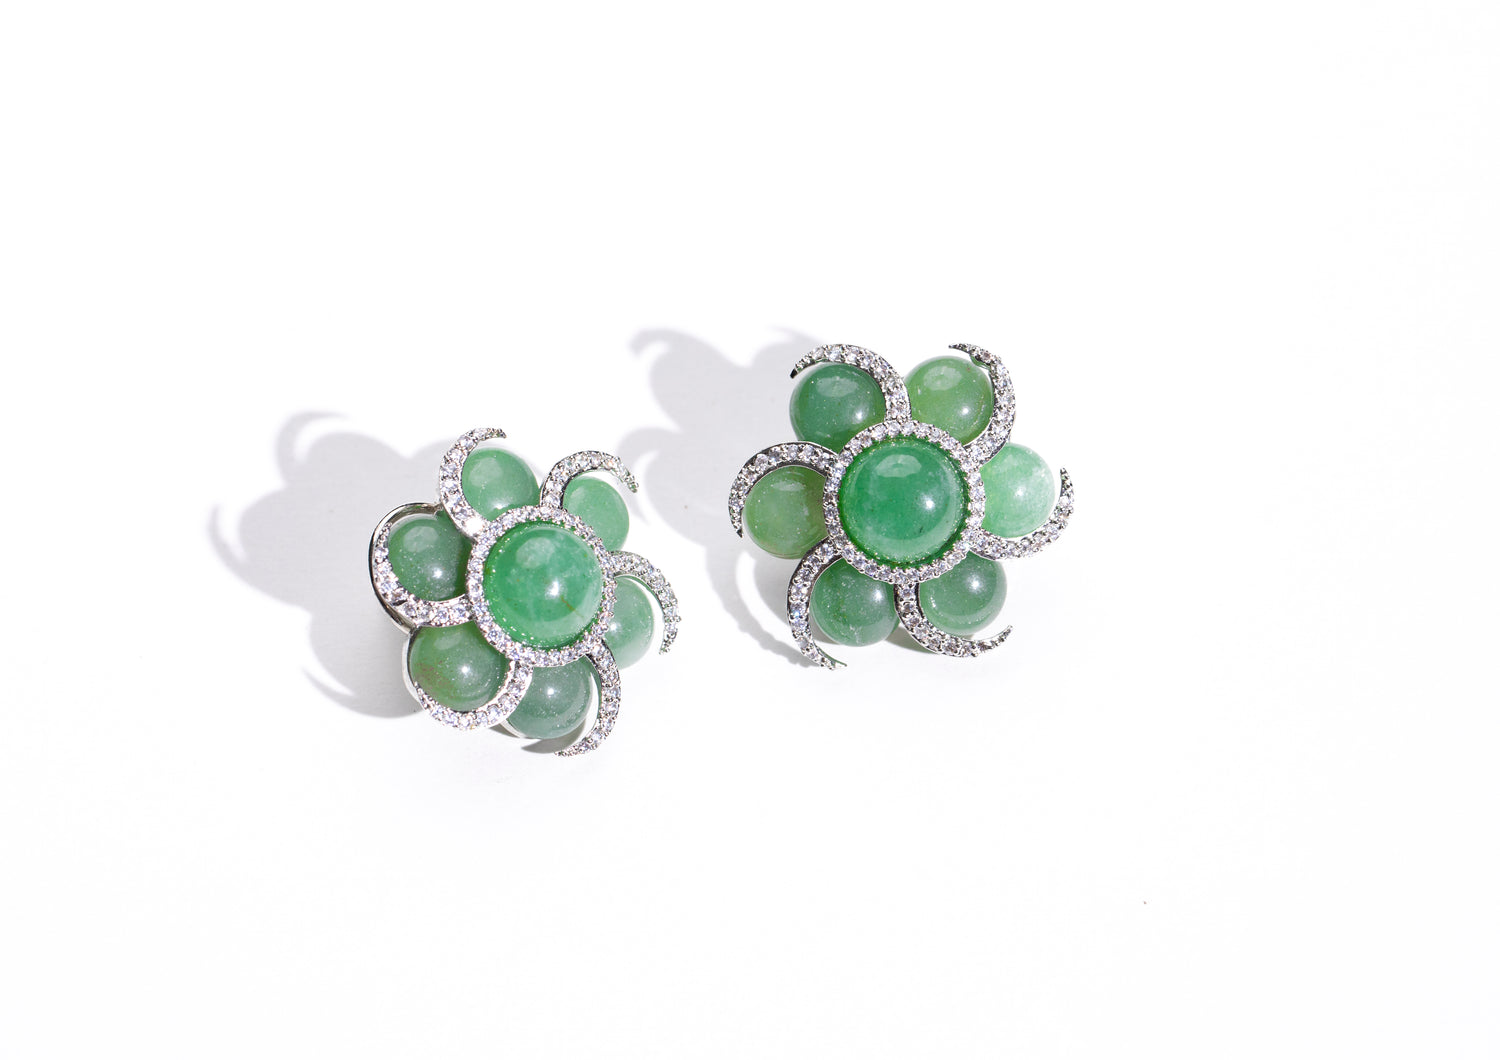 Investment in Jewelry: Green Stone Spiral Flower Earrings: Unique and beautiful design for timeless elegance